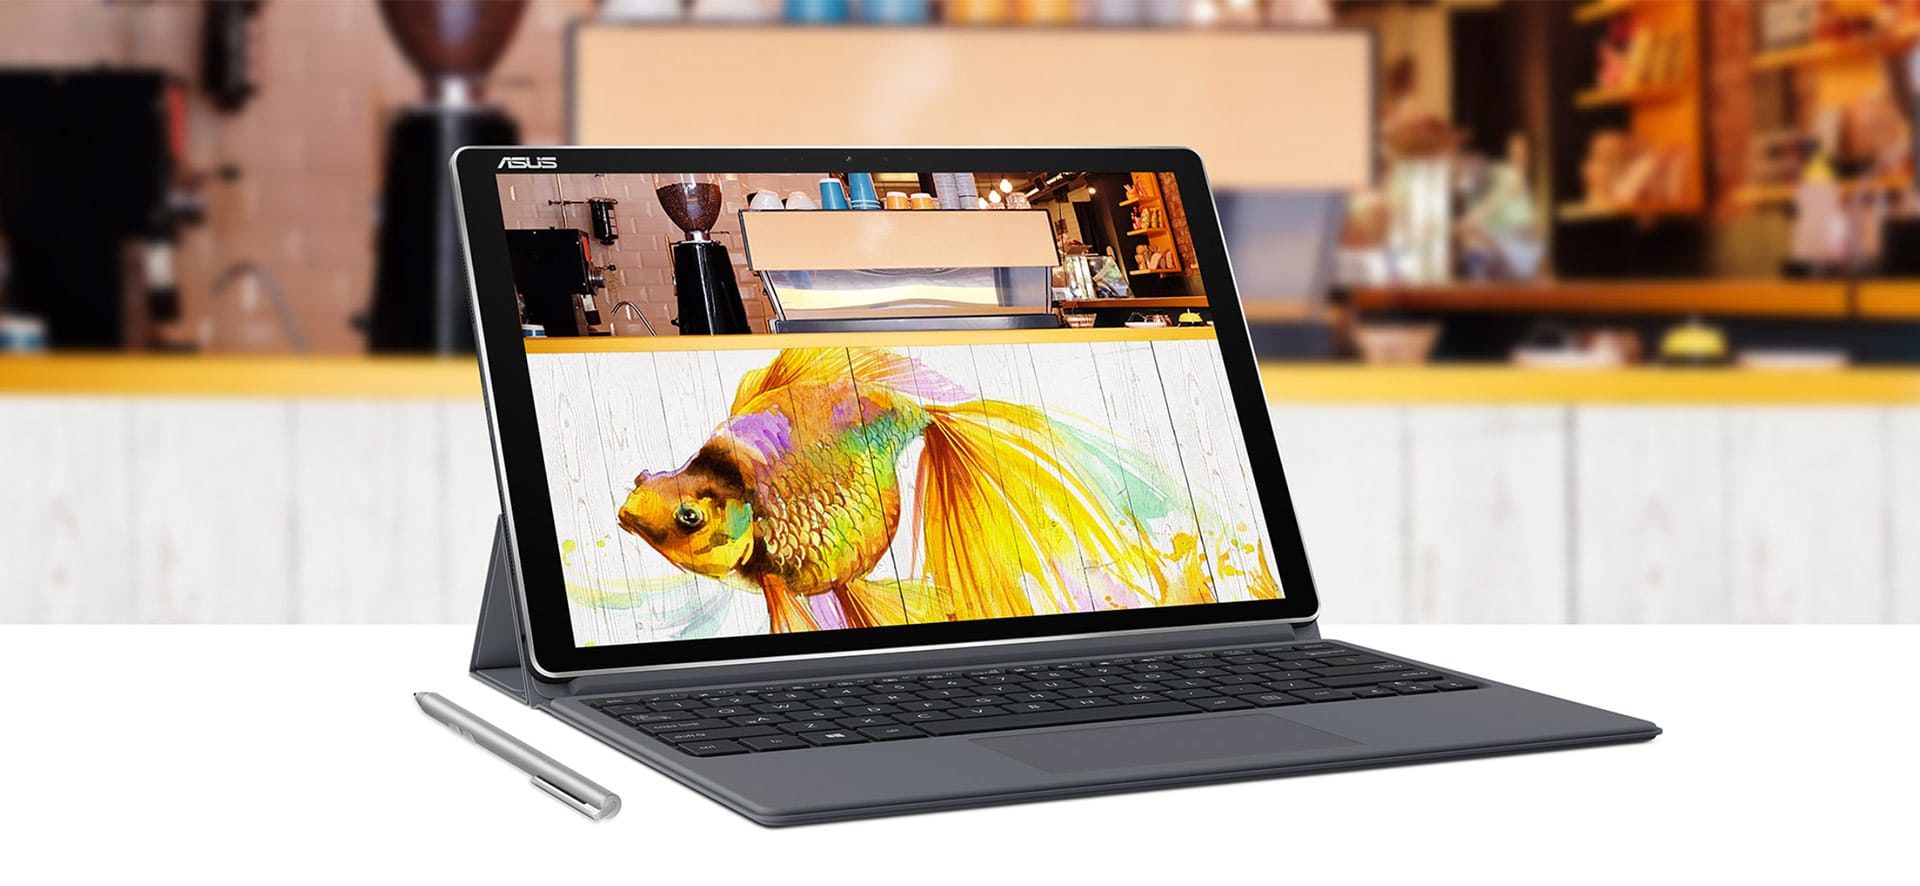 This is the sleek Asus Transformer 3 T305CA